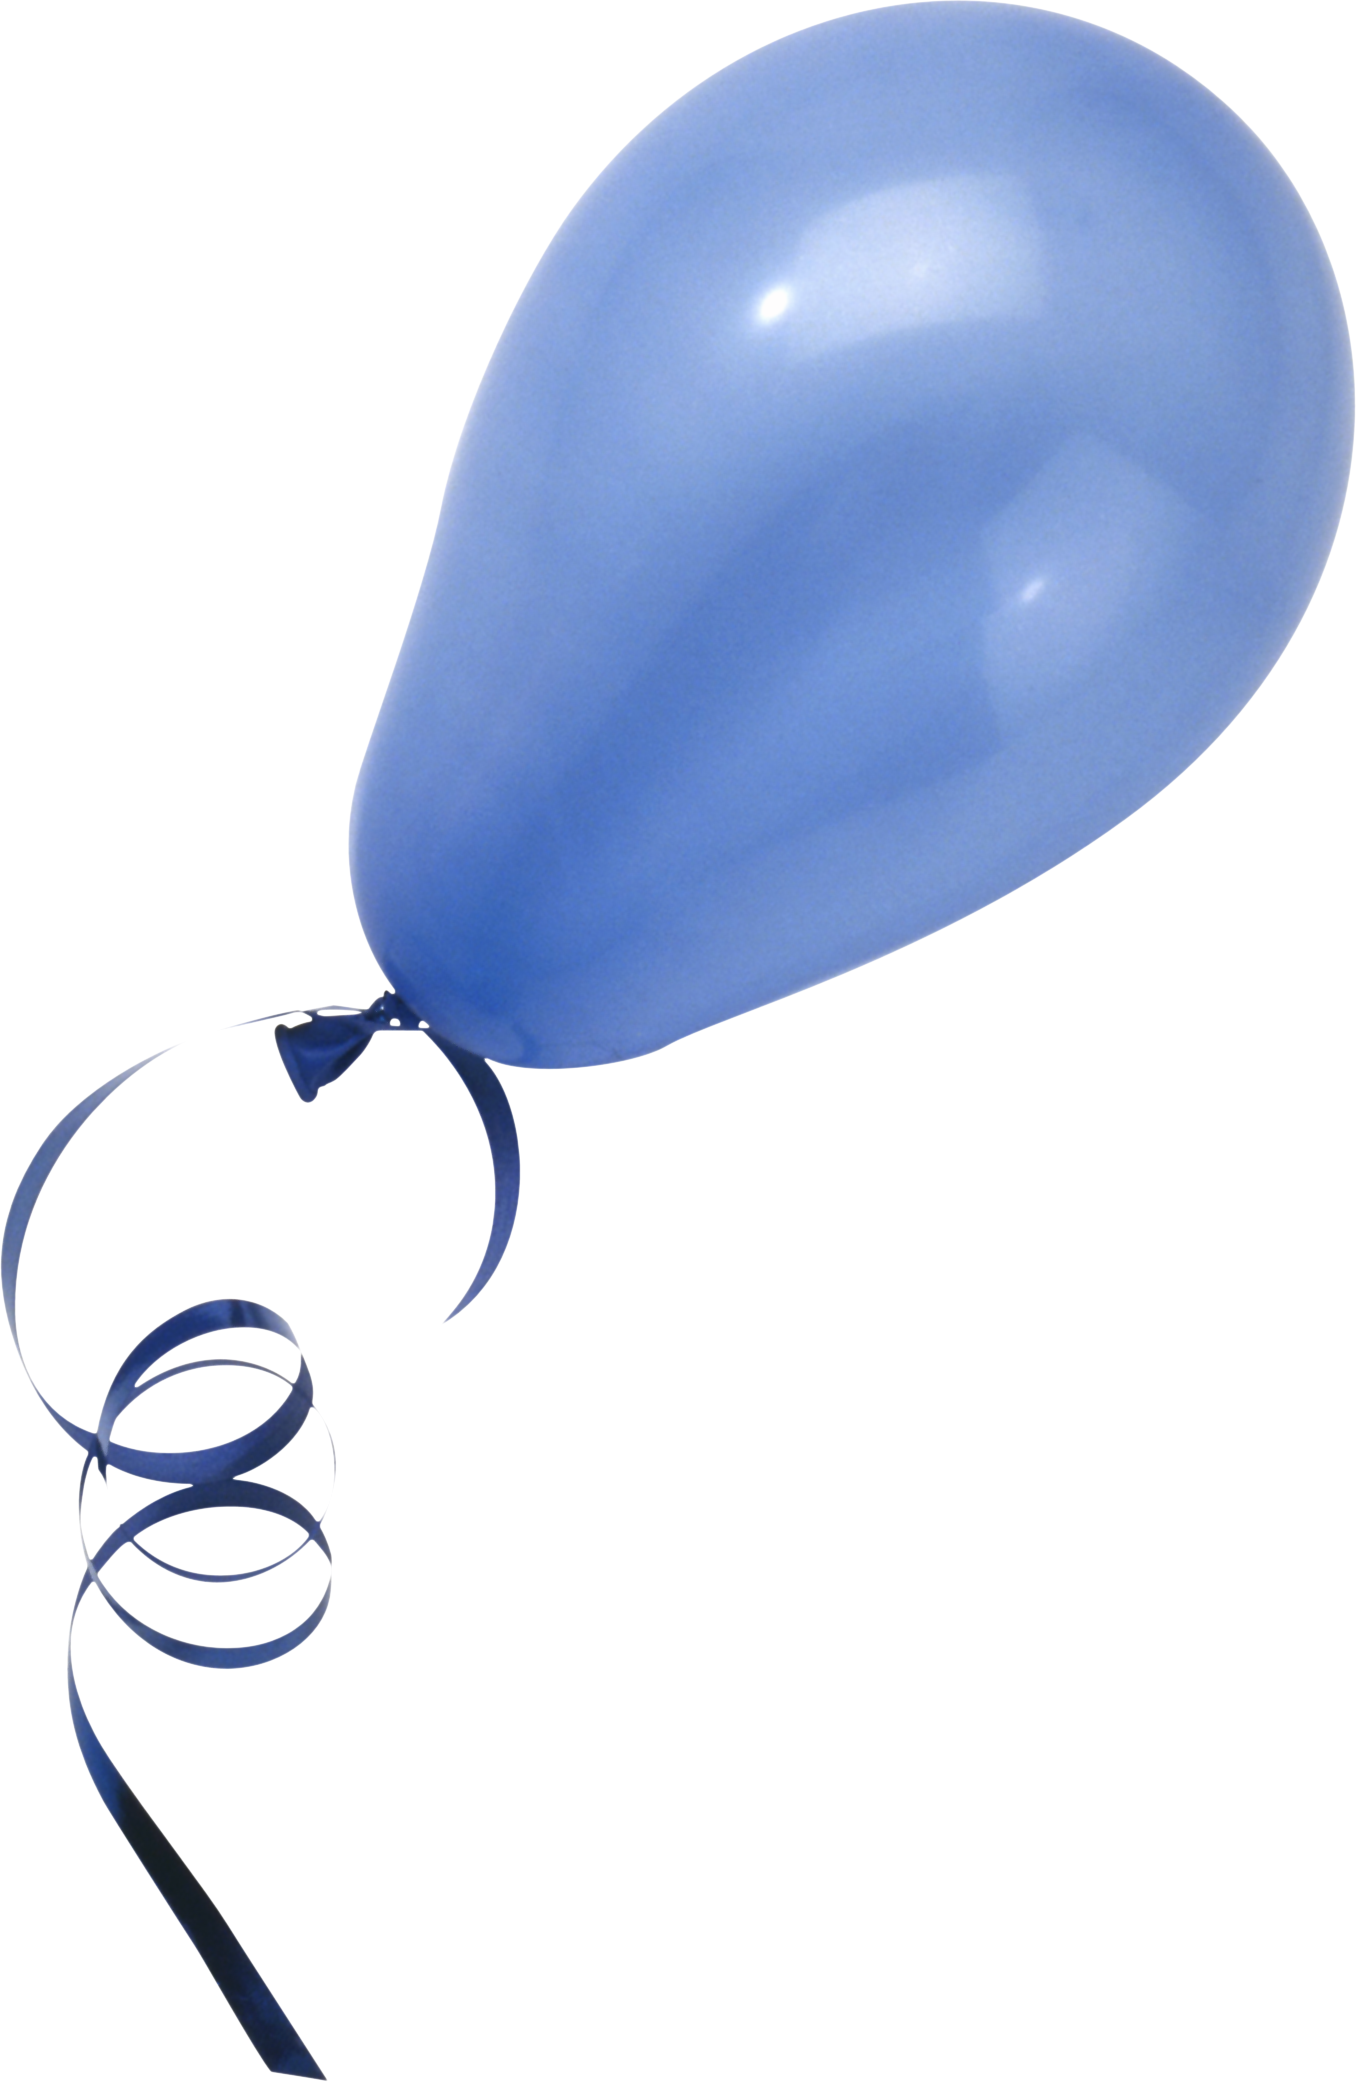 Blue Balloon PNG Image.